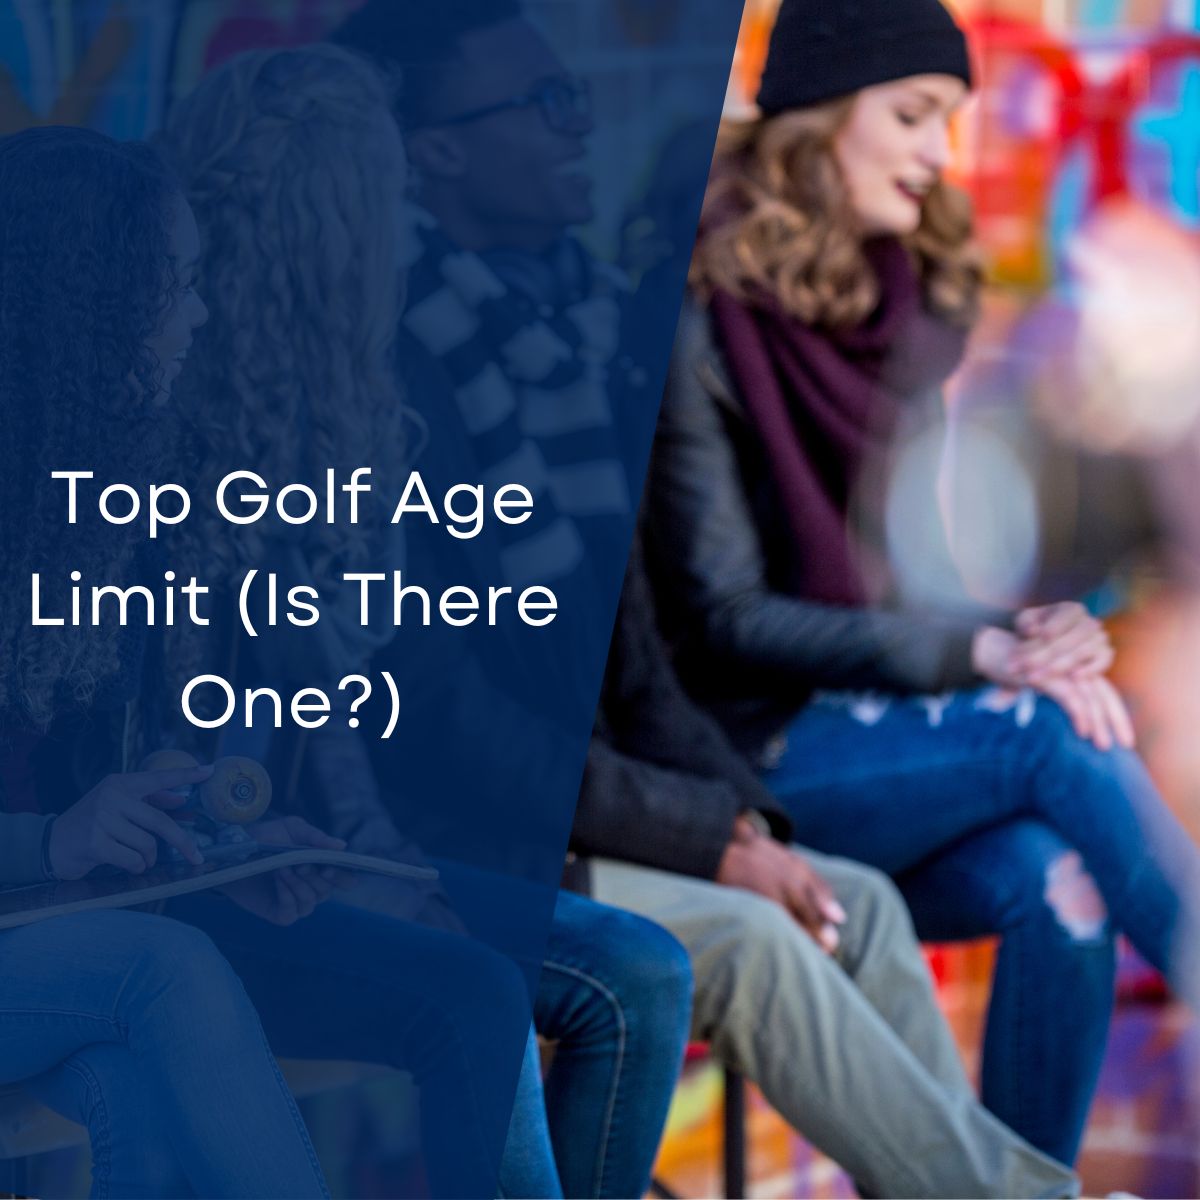 Top Golf Age Limit (Is There One?)